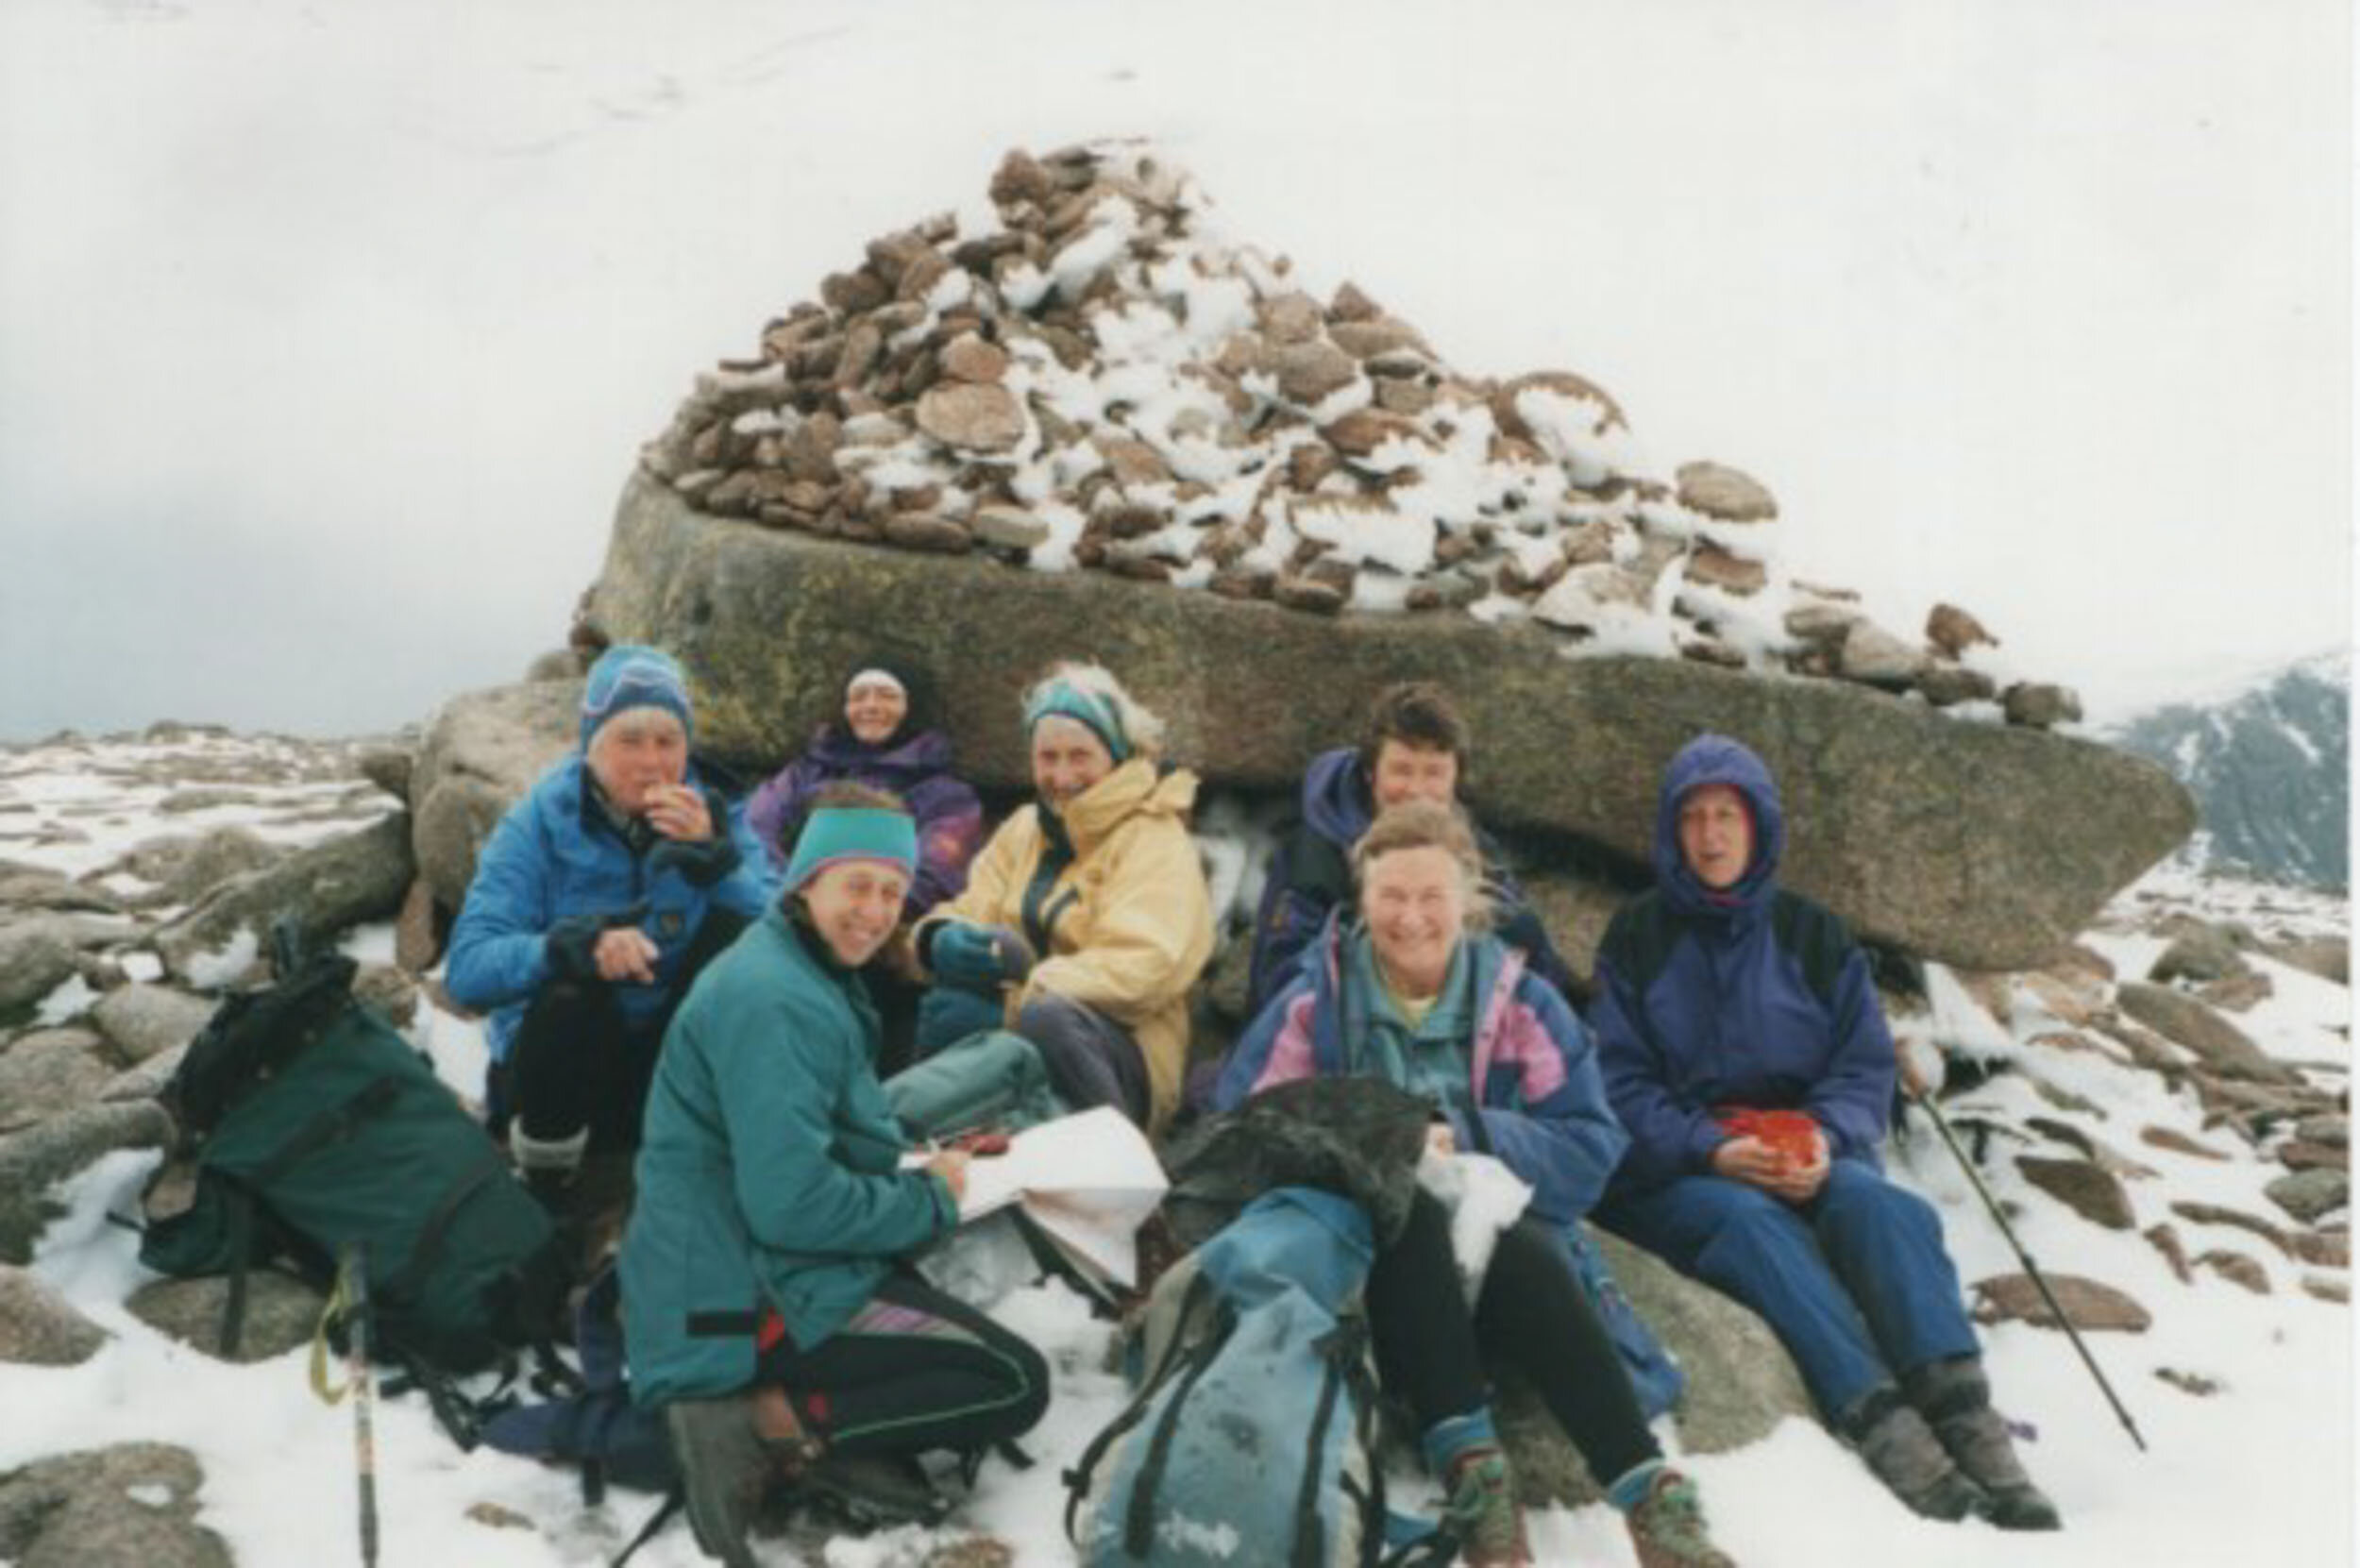 On the Cairngorm Plateau, Scotland, in 2000 